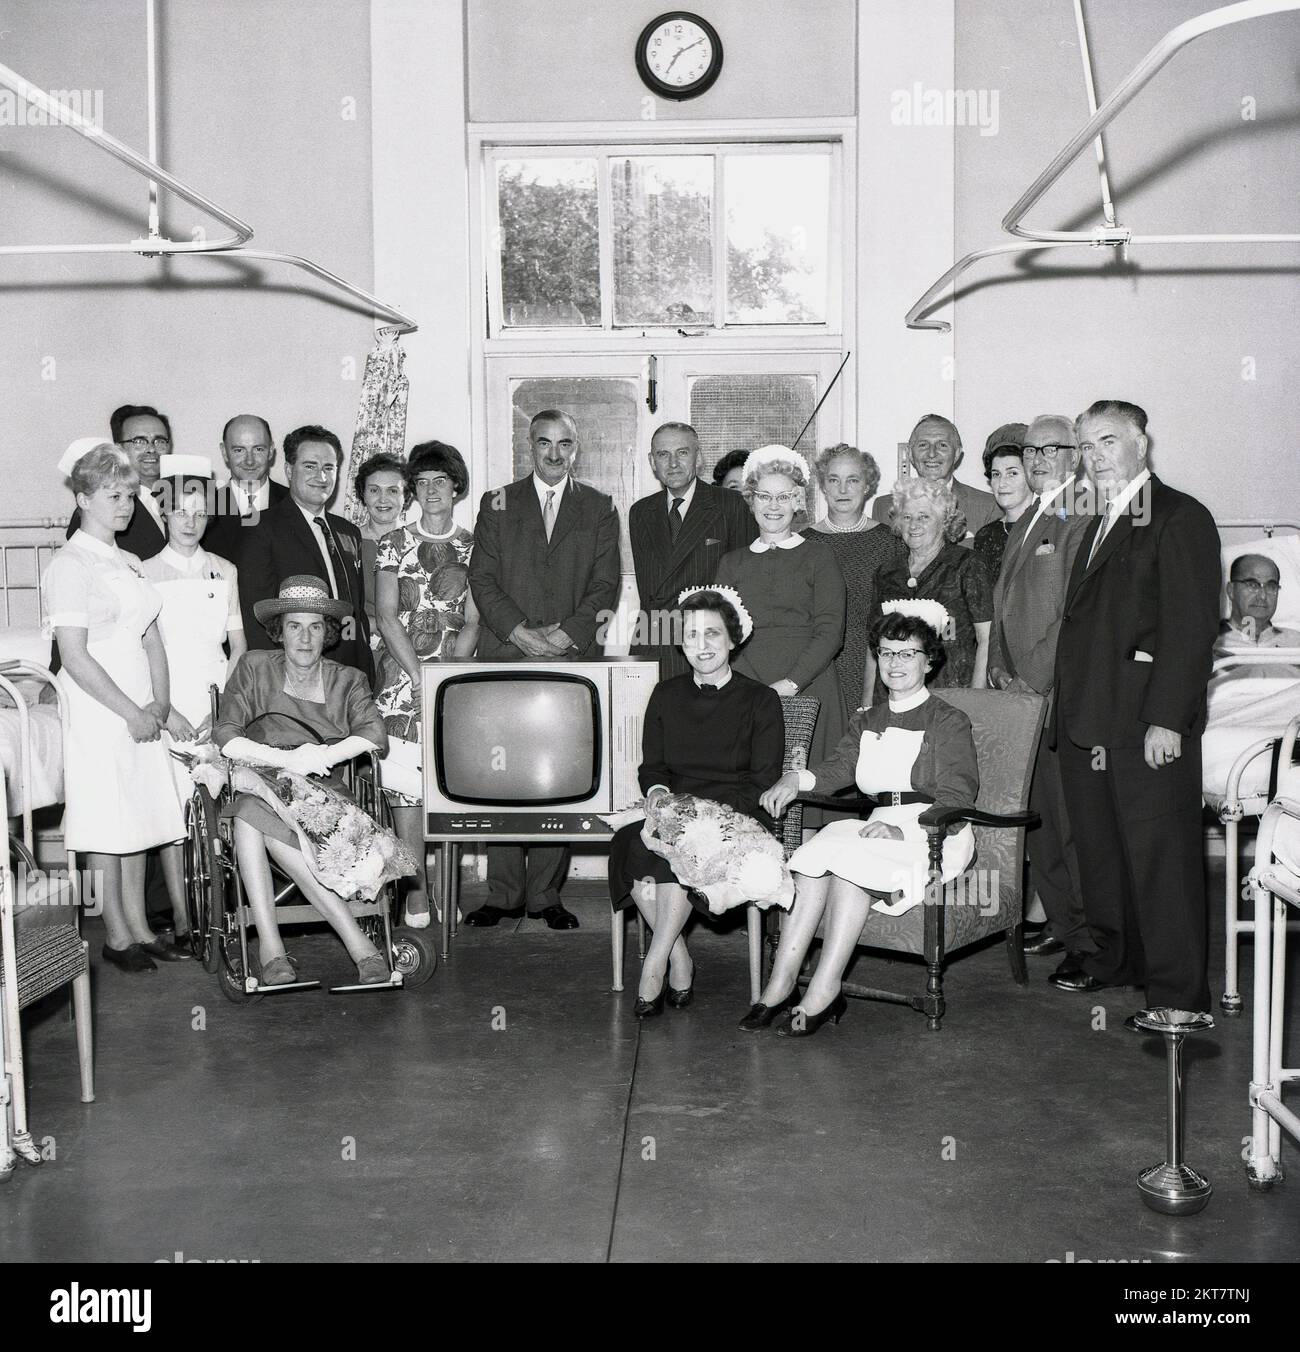 1964, historical, nurses and medical staff gather for a group photo to celebrate a new television set arriving on a hospital ward, England, UK. As televison sets were expensive in this era, it was a major event for hospitals and schools to receive one. Note a stainless steel stand alone ashtray can be seen on the right as in this era, as smoking was still alllowed at certain times on many hospital wards. Stock Photo